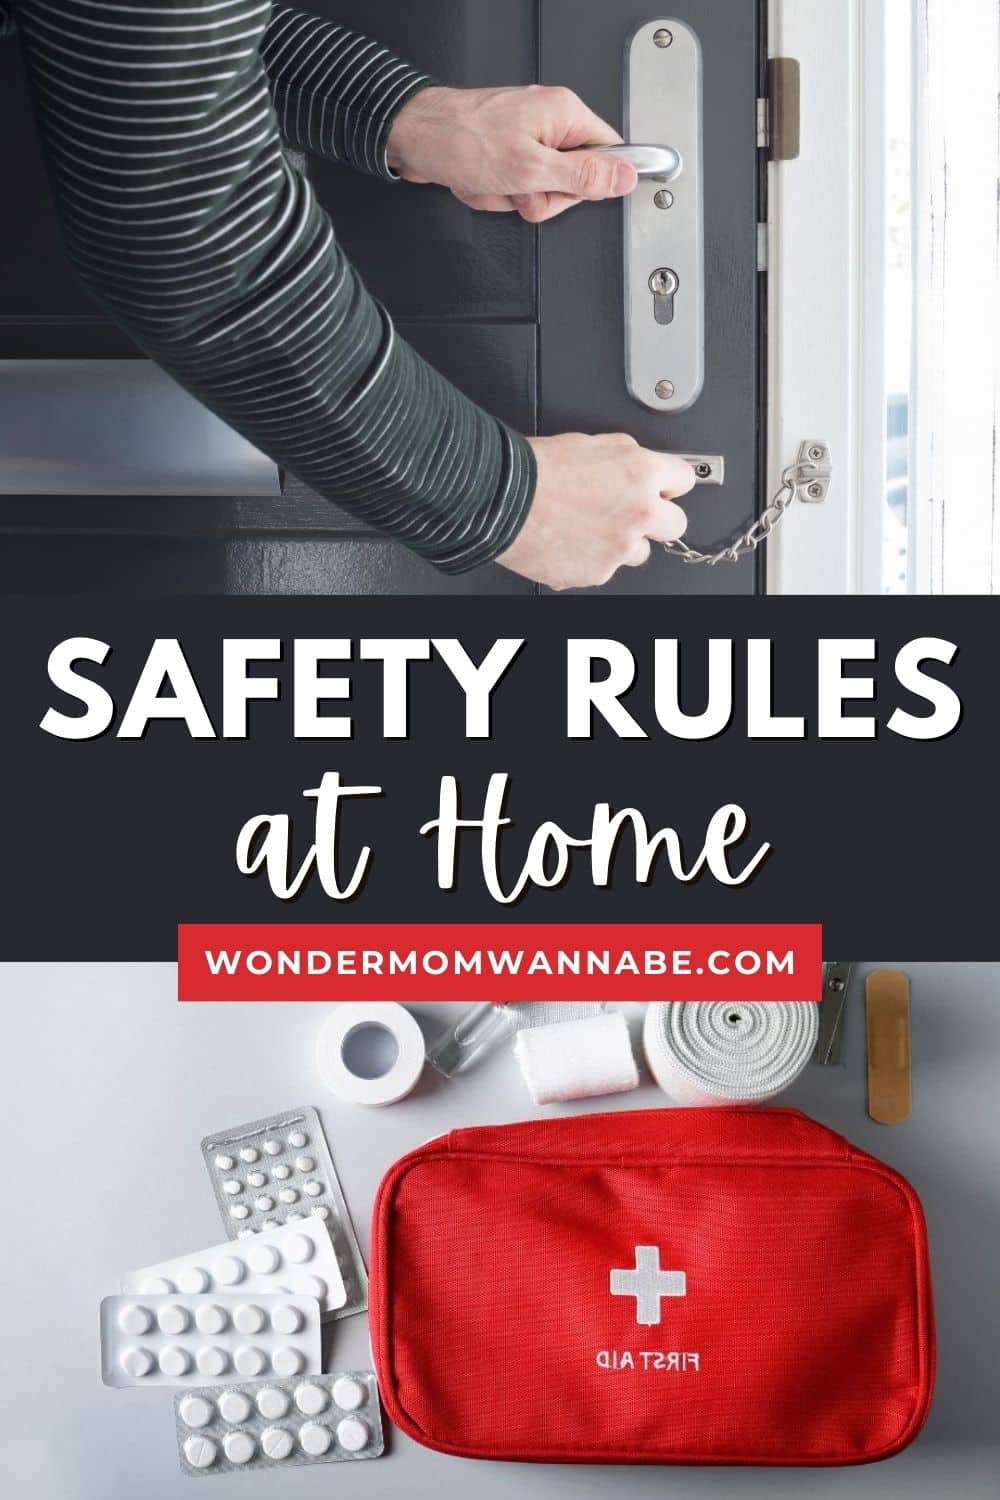 Safety is a top priority at home, which is why it's important to follow safety rules to ensure a secure environment for yourself and your loved ones.